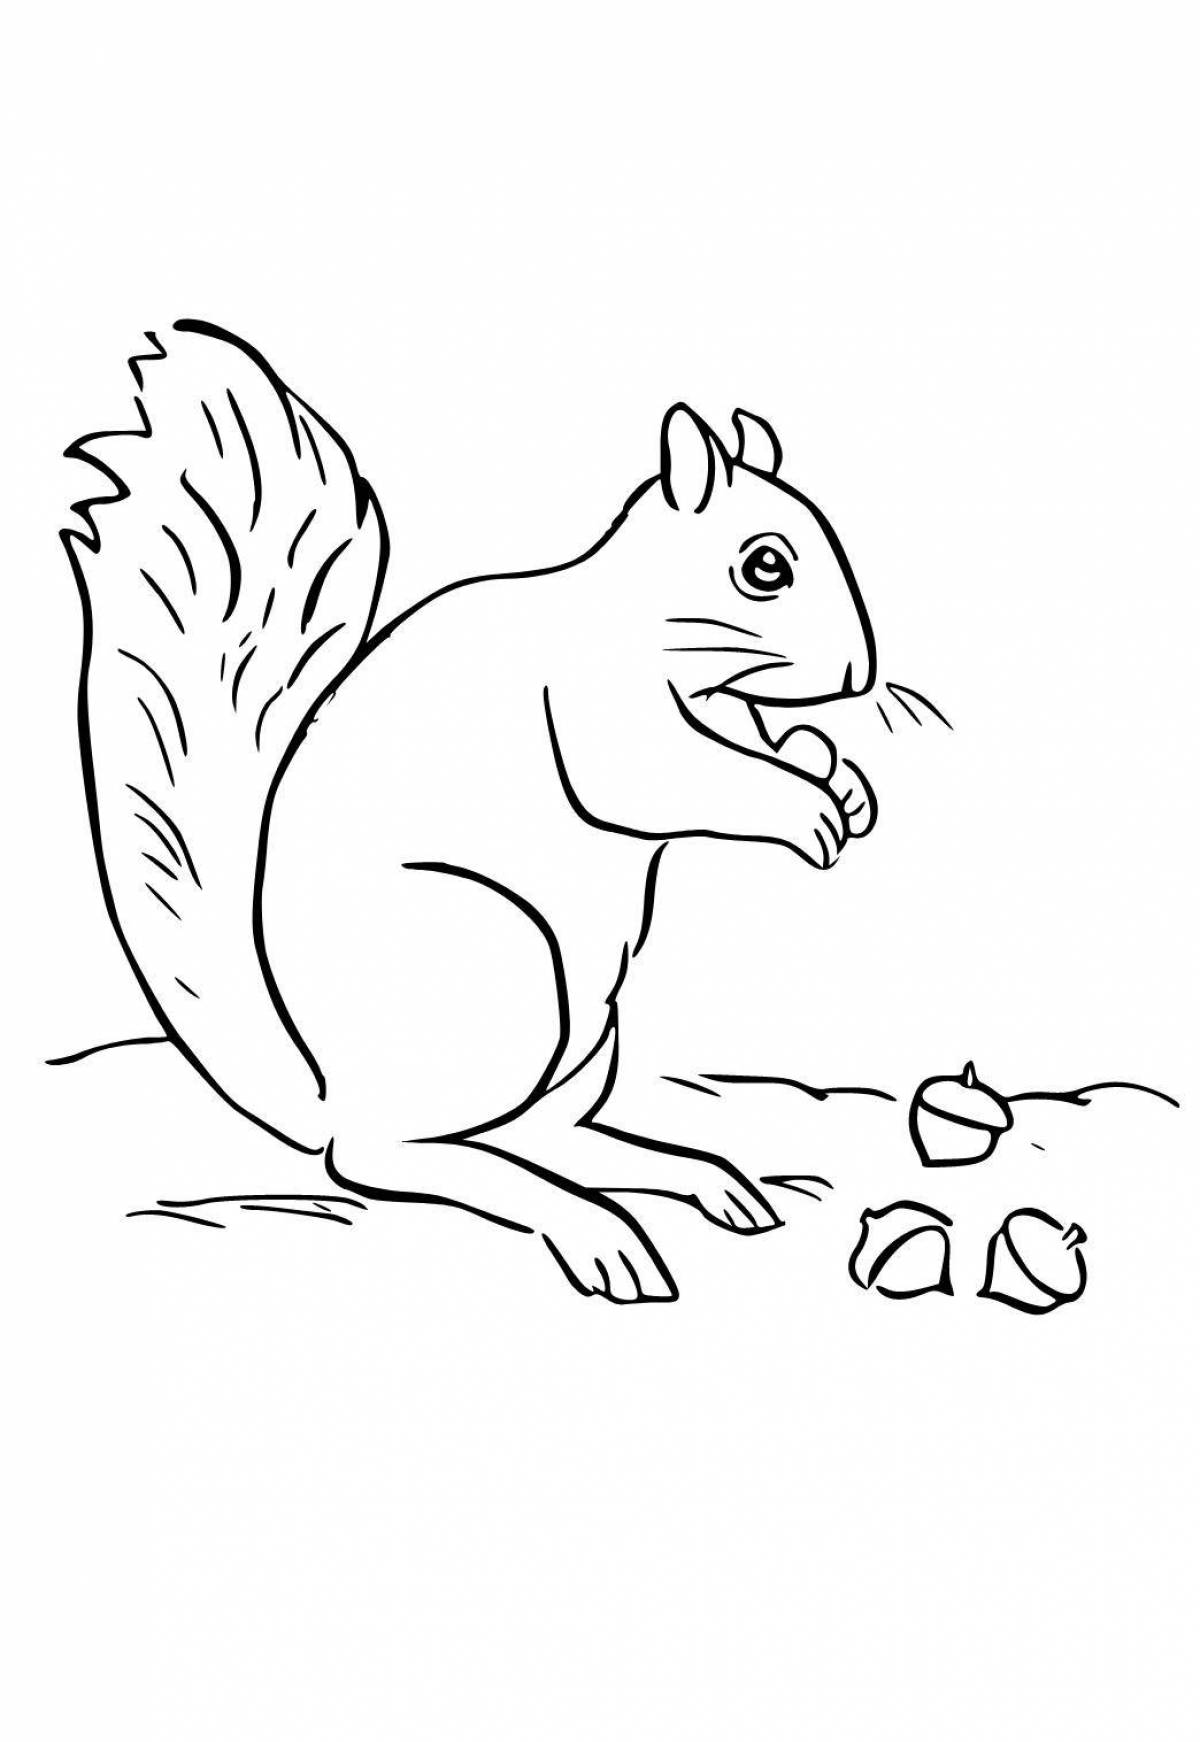 Coloring page wild little squirrel